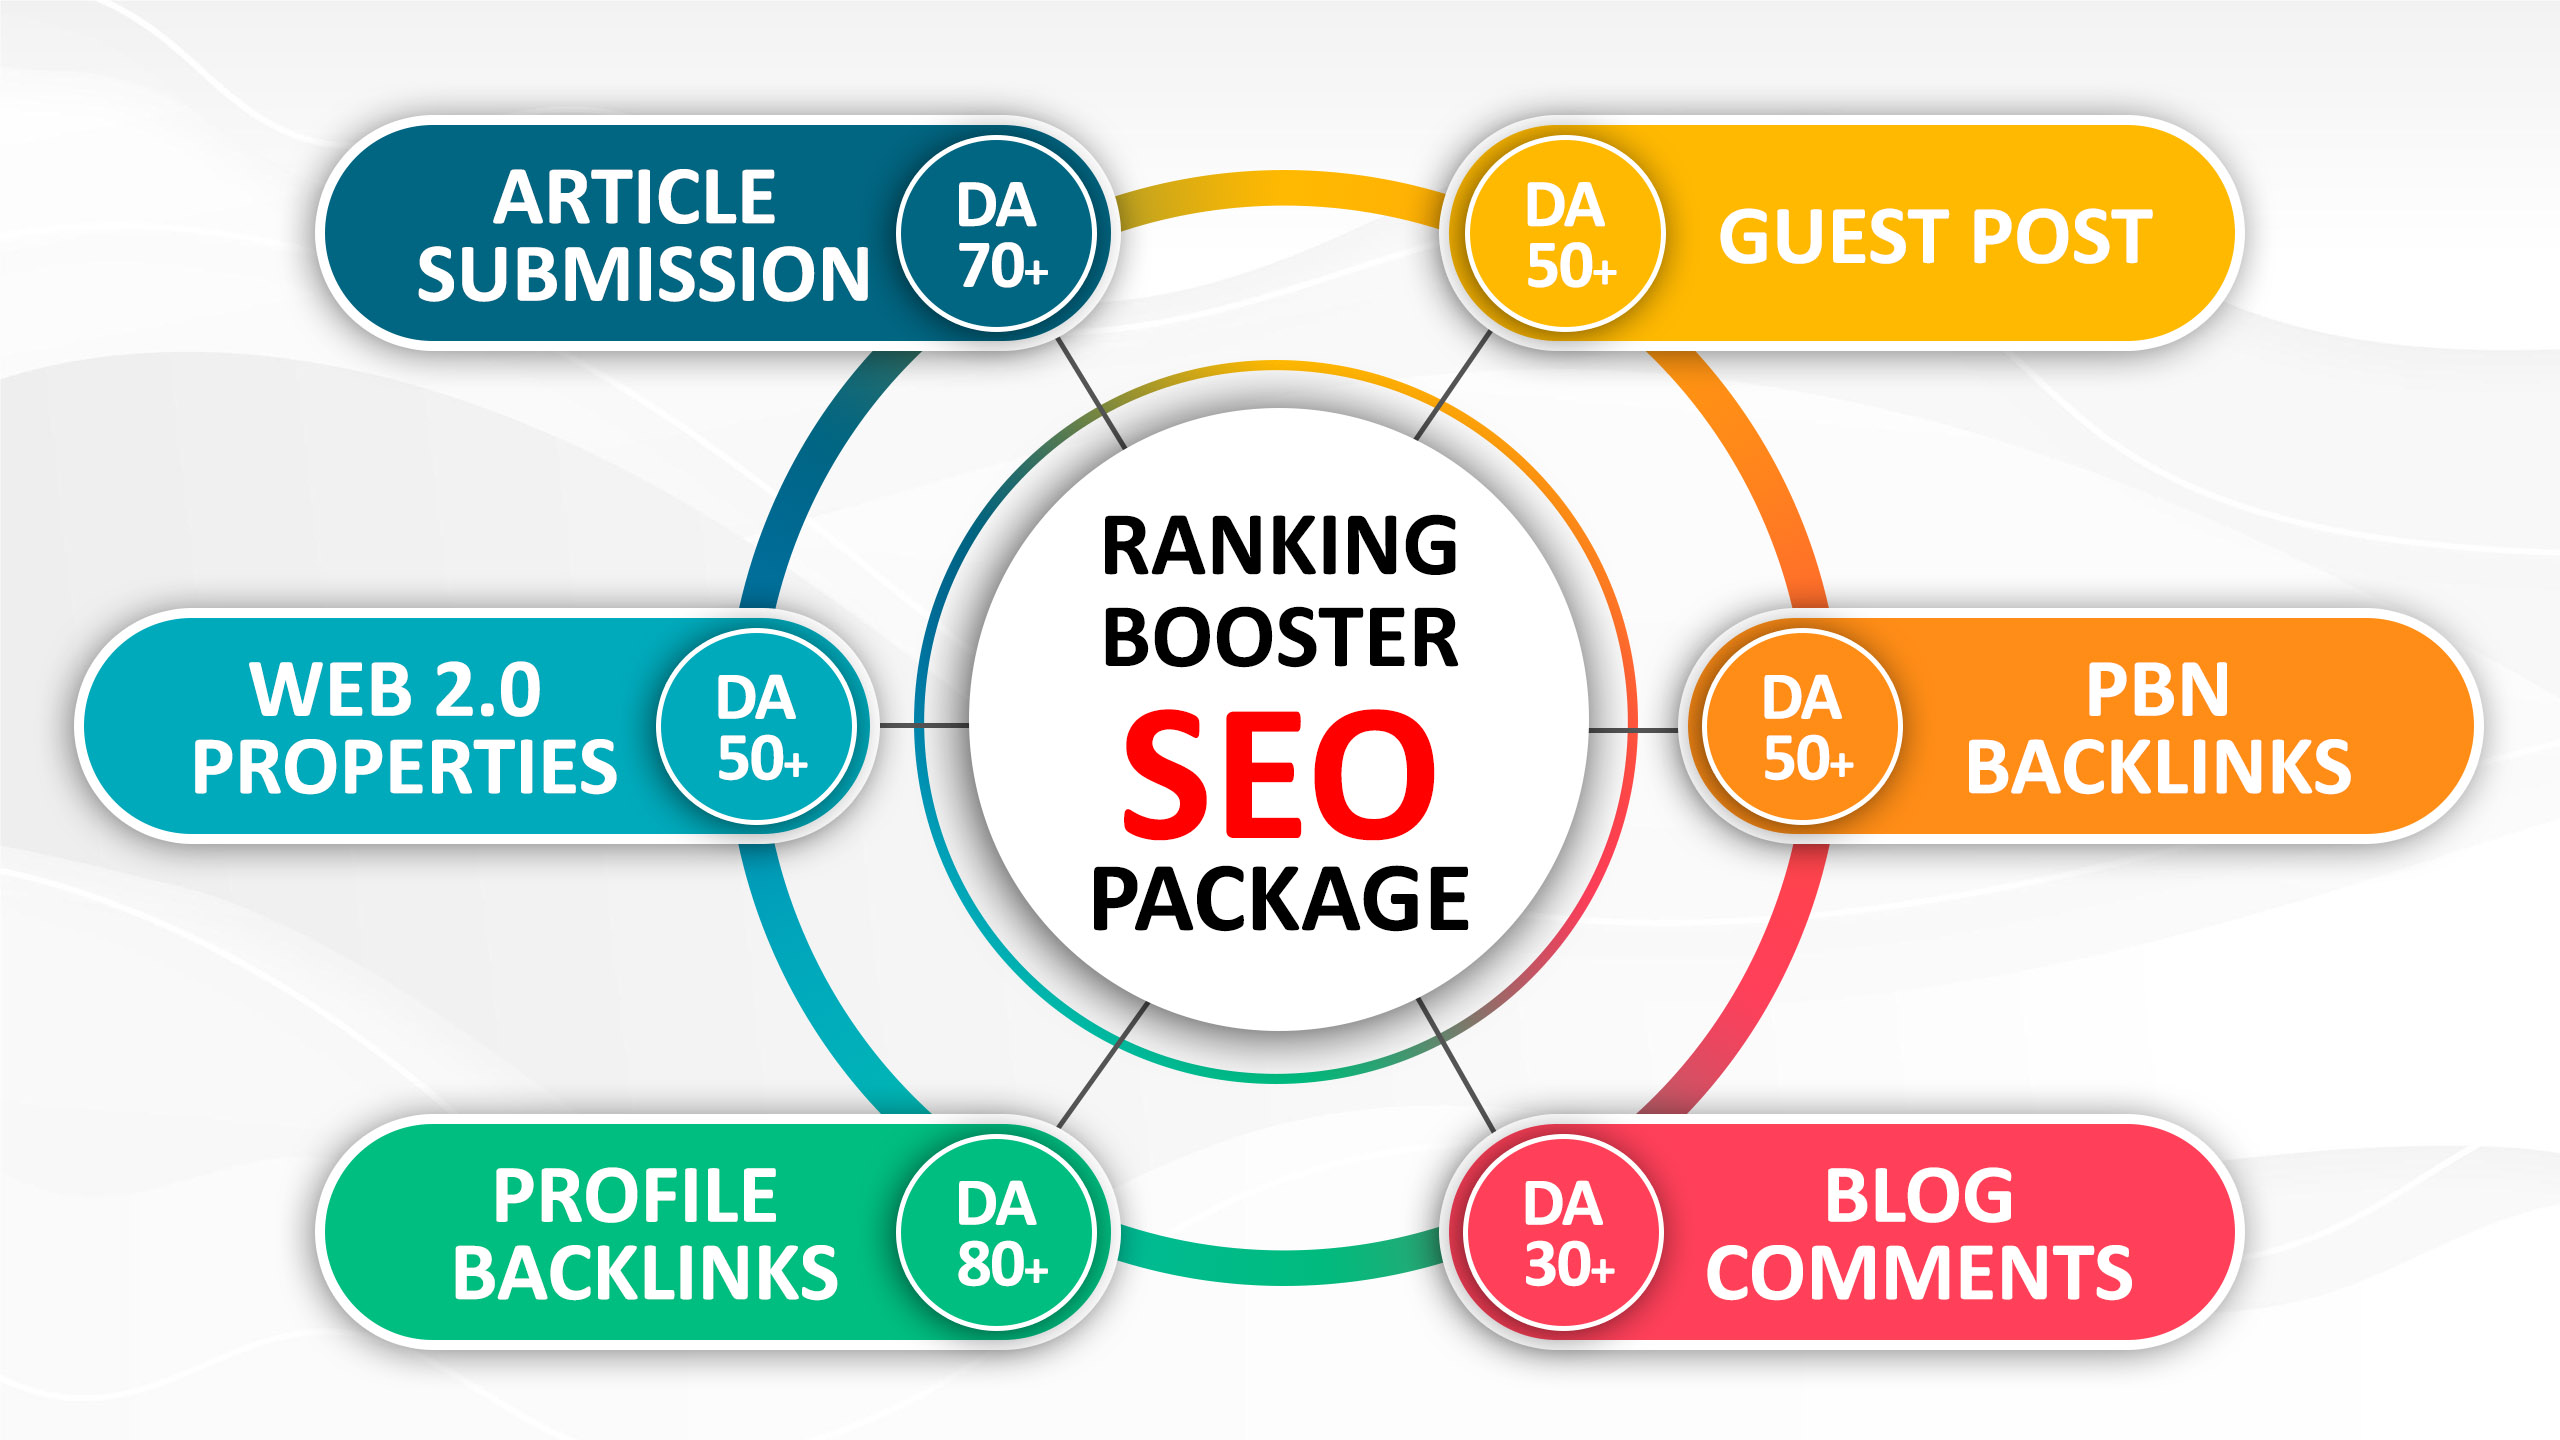 Skyrocket Your Website With Ranking Booster SEO Package 